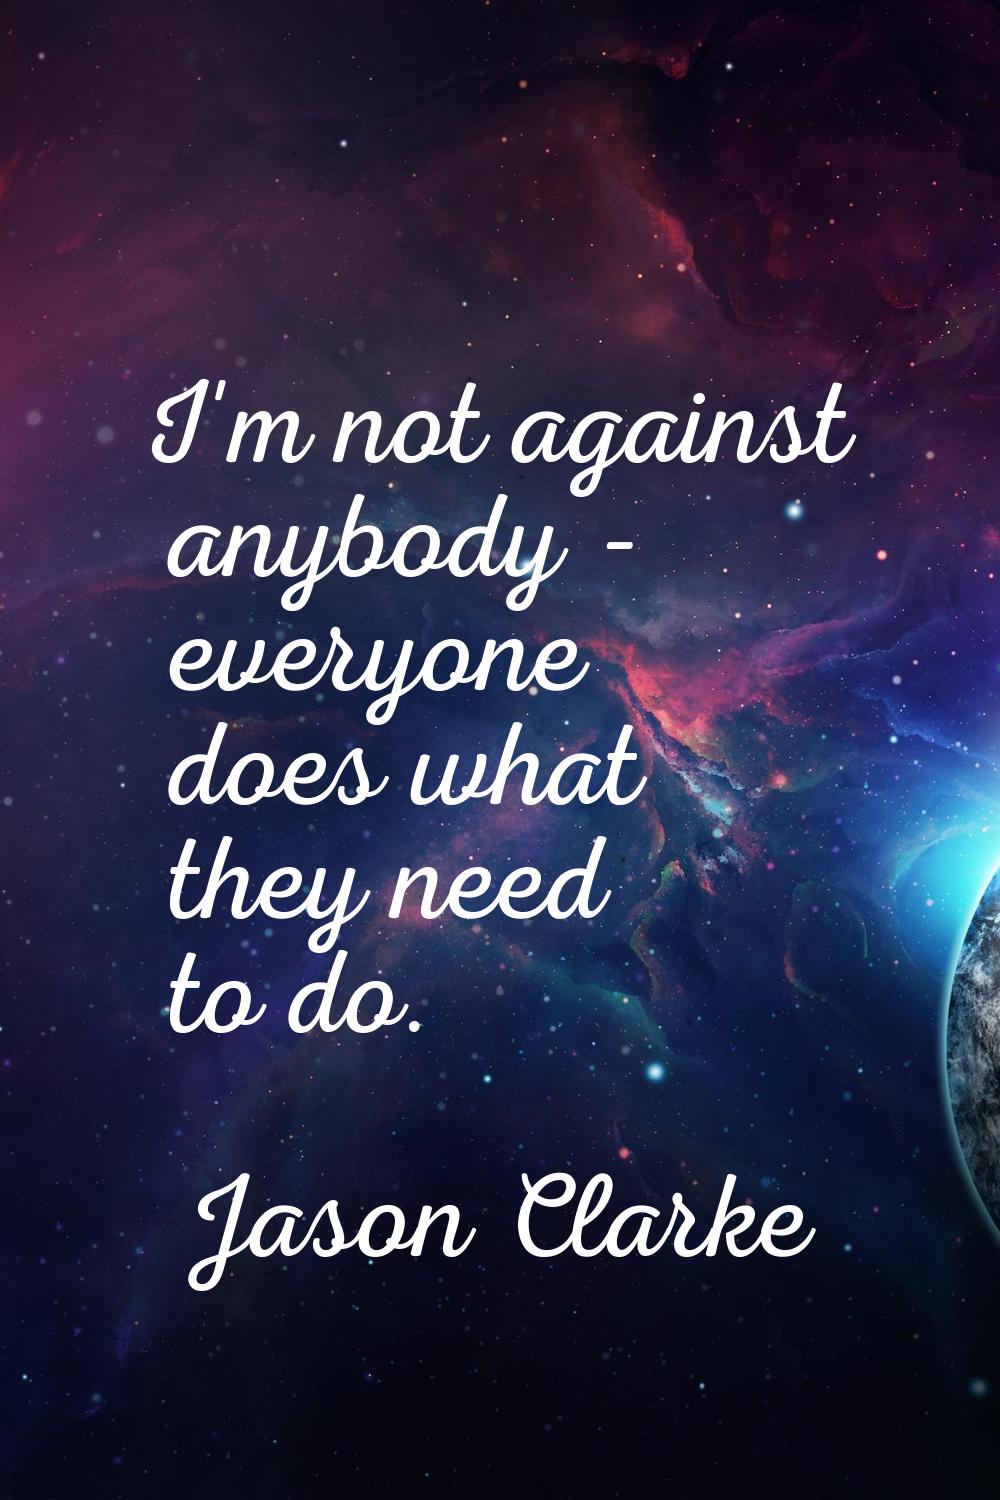 I'm not against anybody - everyone does what they need to do.